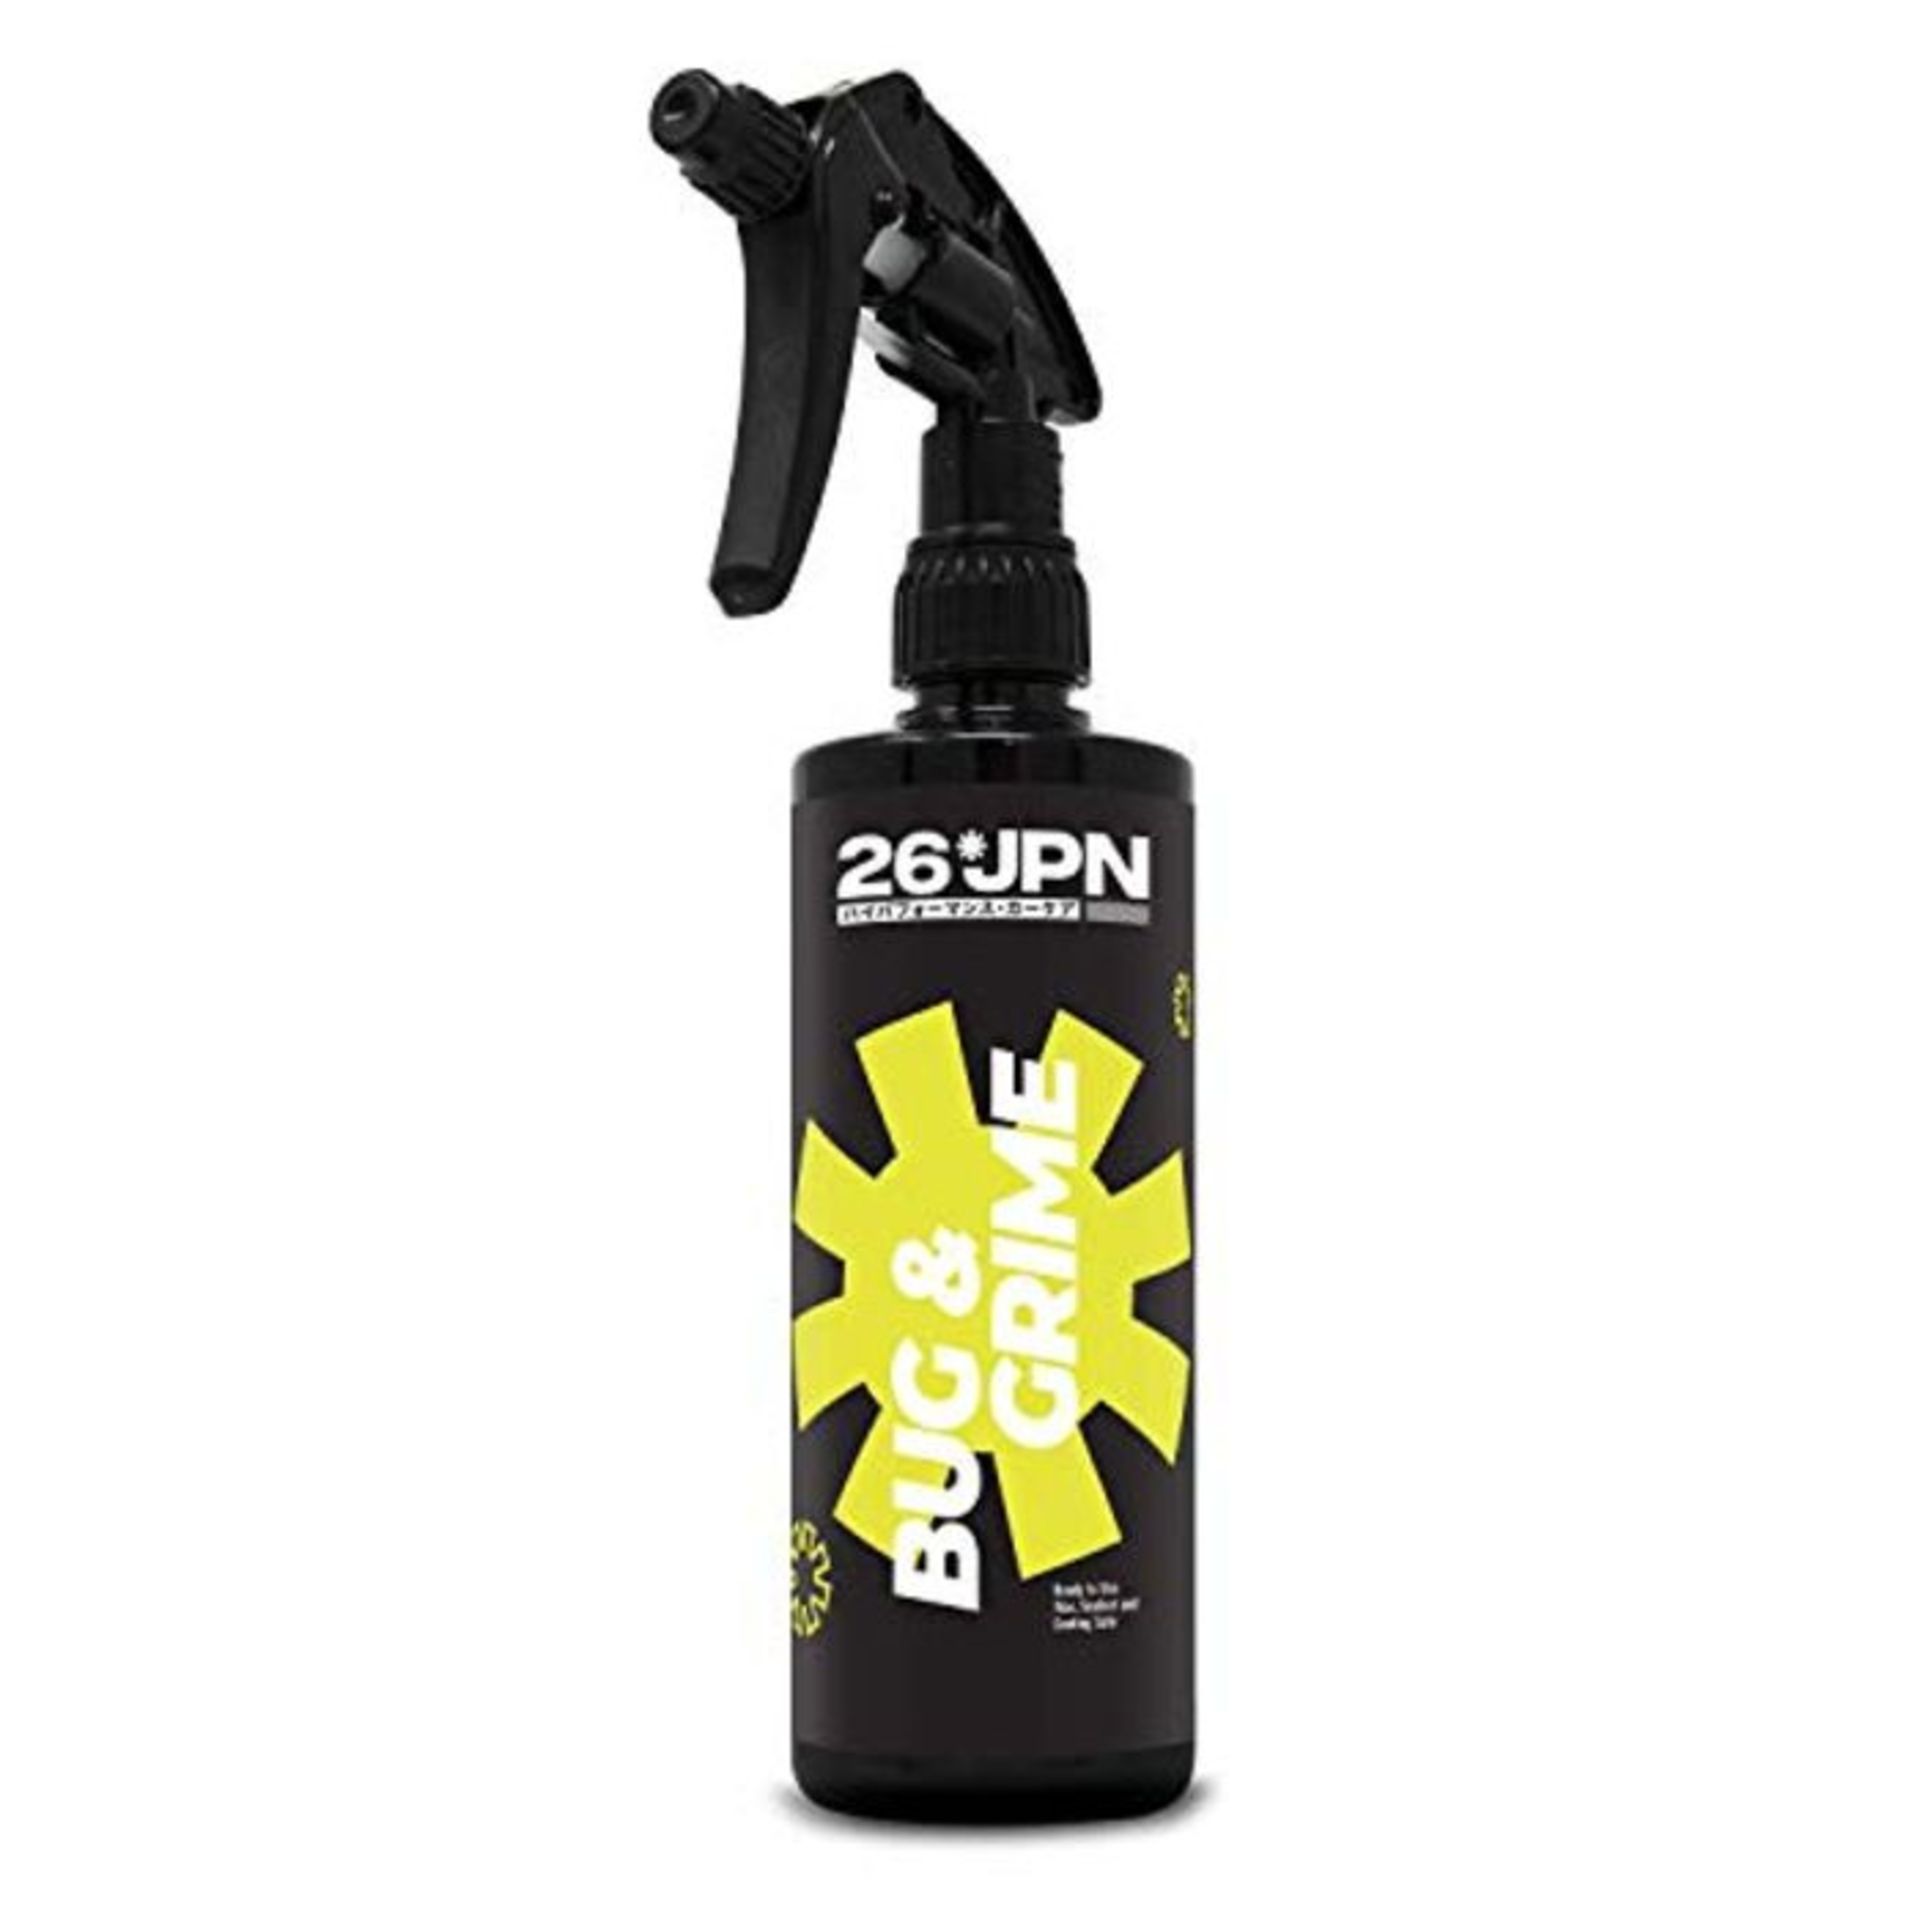 26JPN Bug & Grime - Bug & Dirt Cleaner, Wax, Sealant and Coating Safe, Ready to Use, F